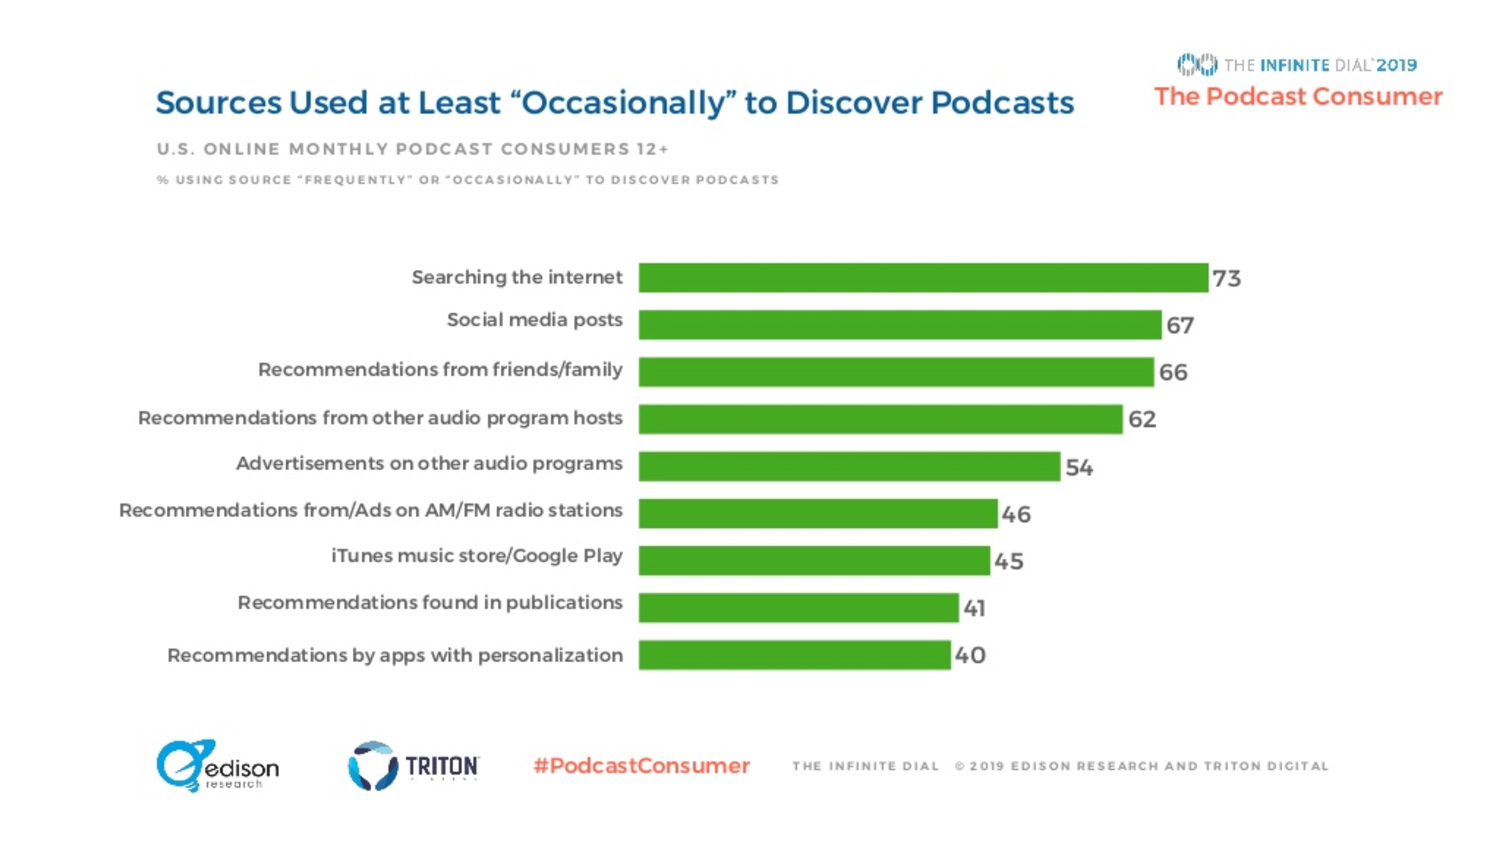 Sources of podcast discovery - Social media, search engines, and word-of-mouth